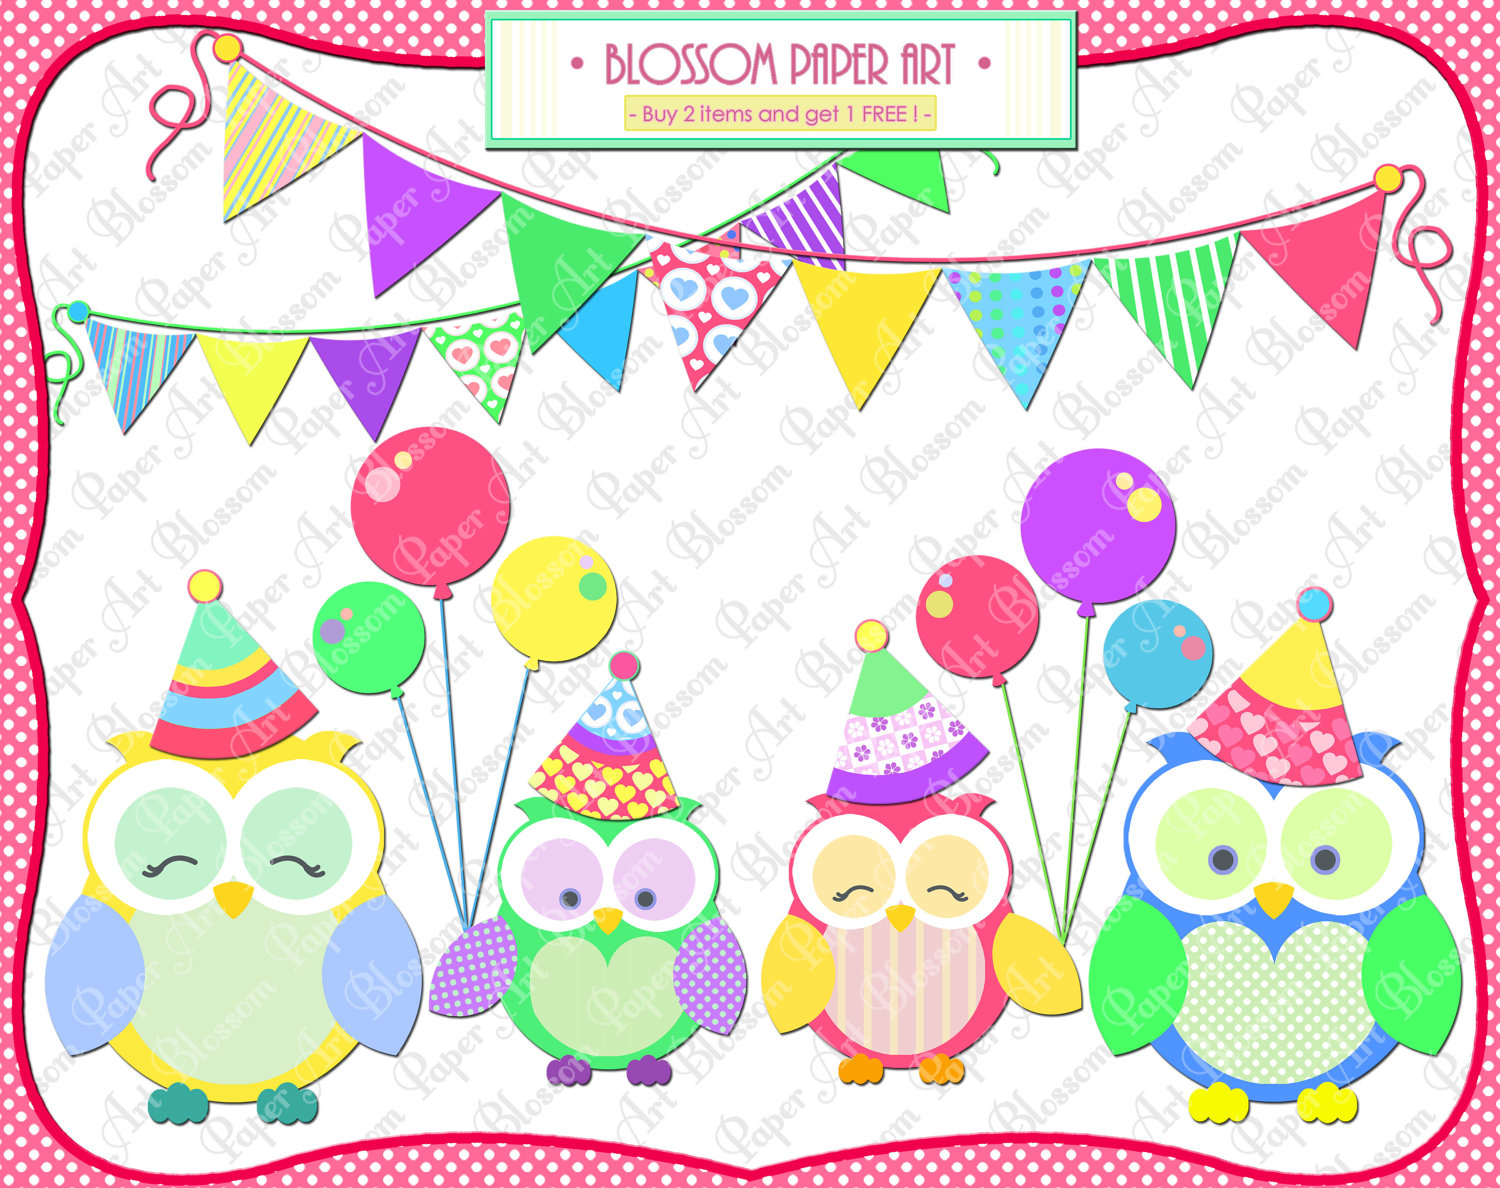 Owls Party Clipart Clip Art Birthday By Blossompaperart On Etsy